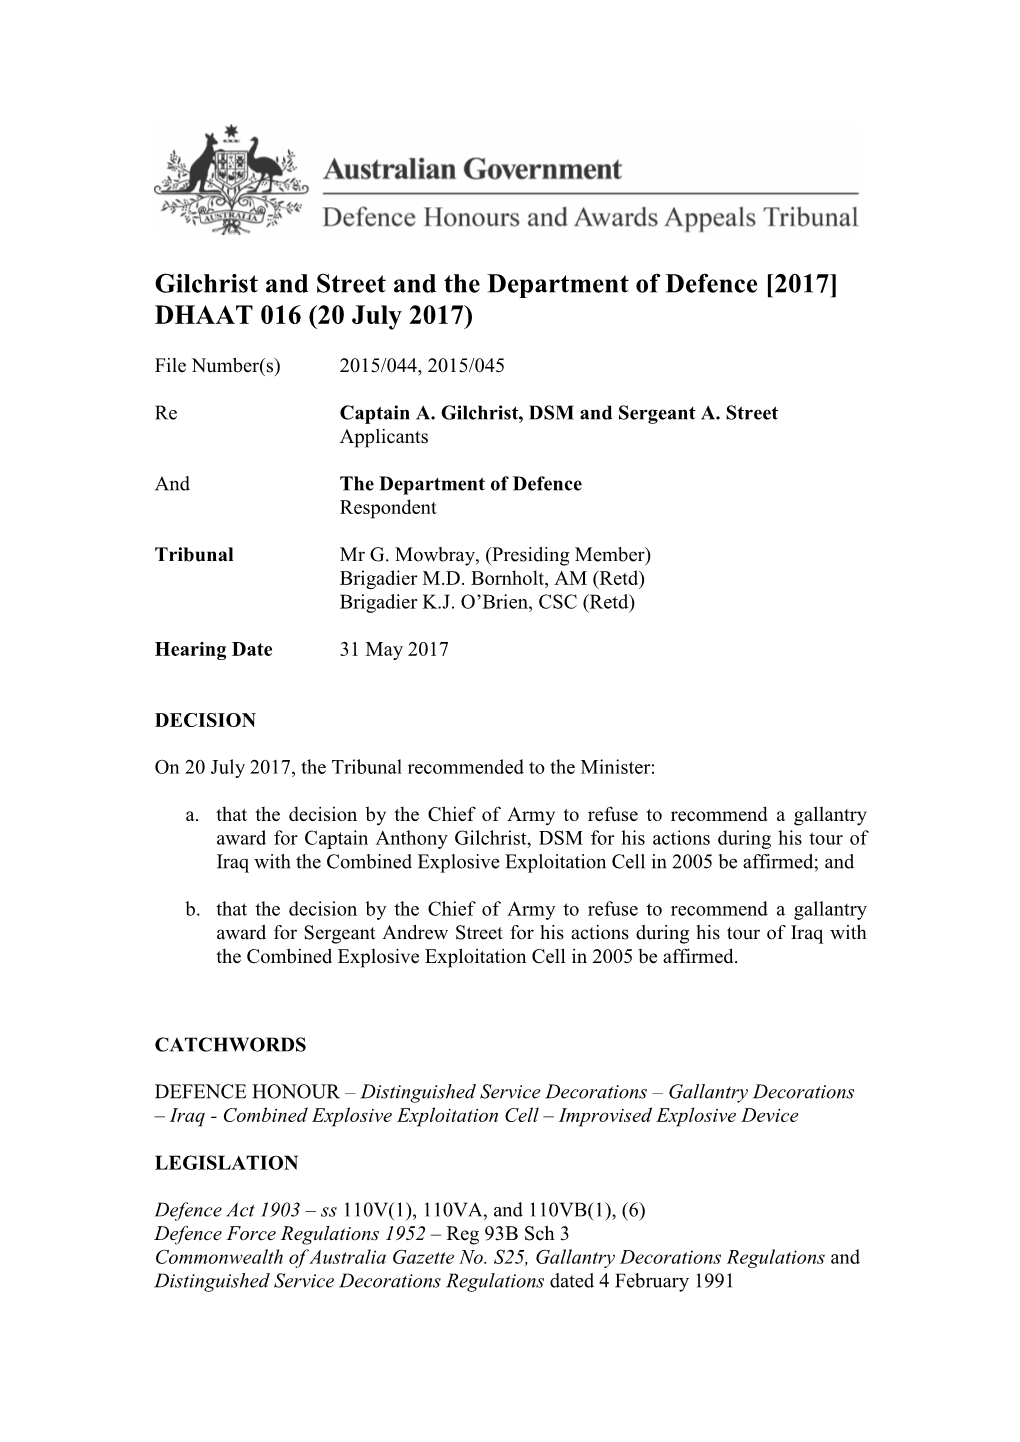 Gilchrist and Street and the Department of Defence [2017] DHAAT 016 (20 July 2017)